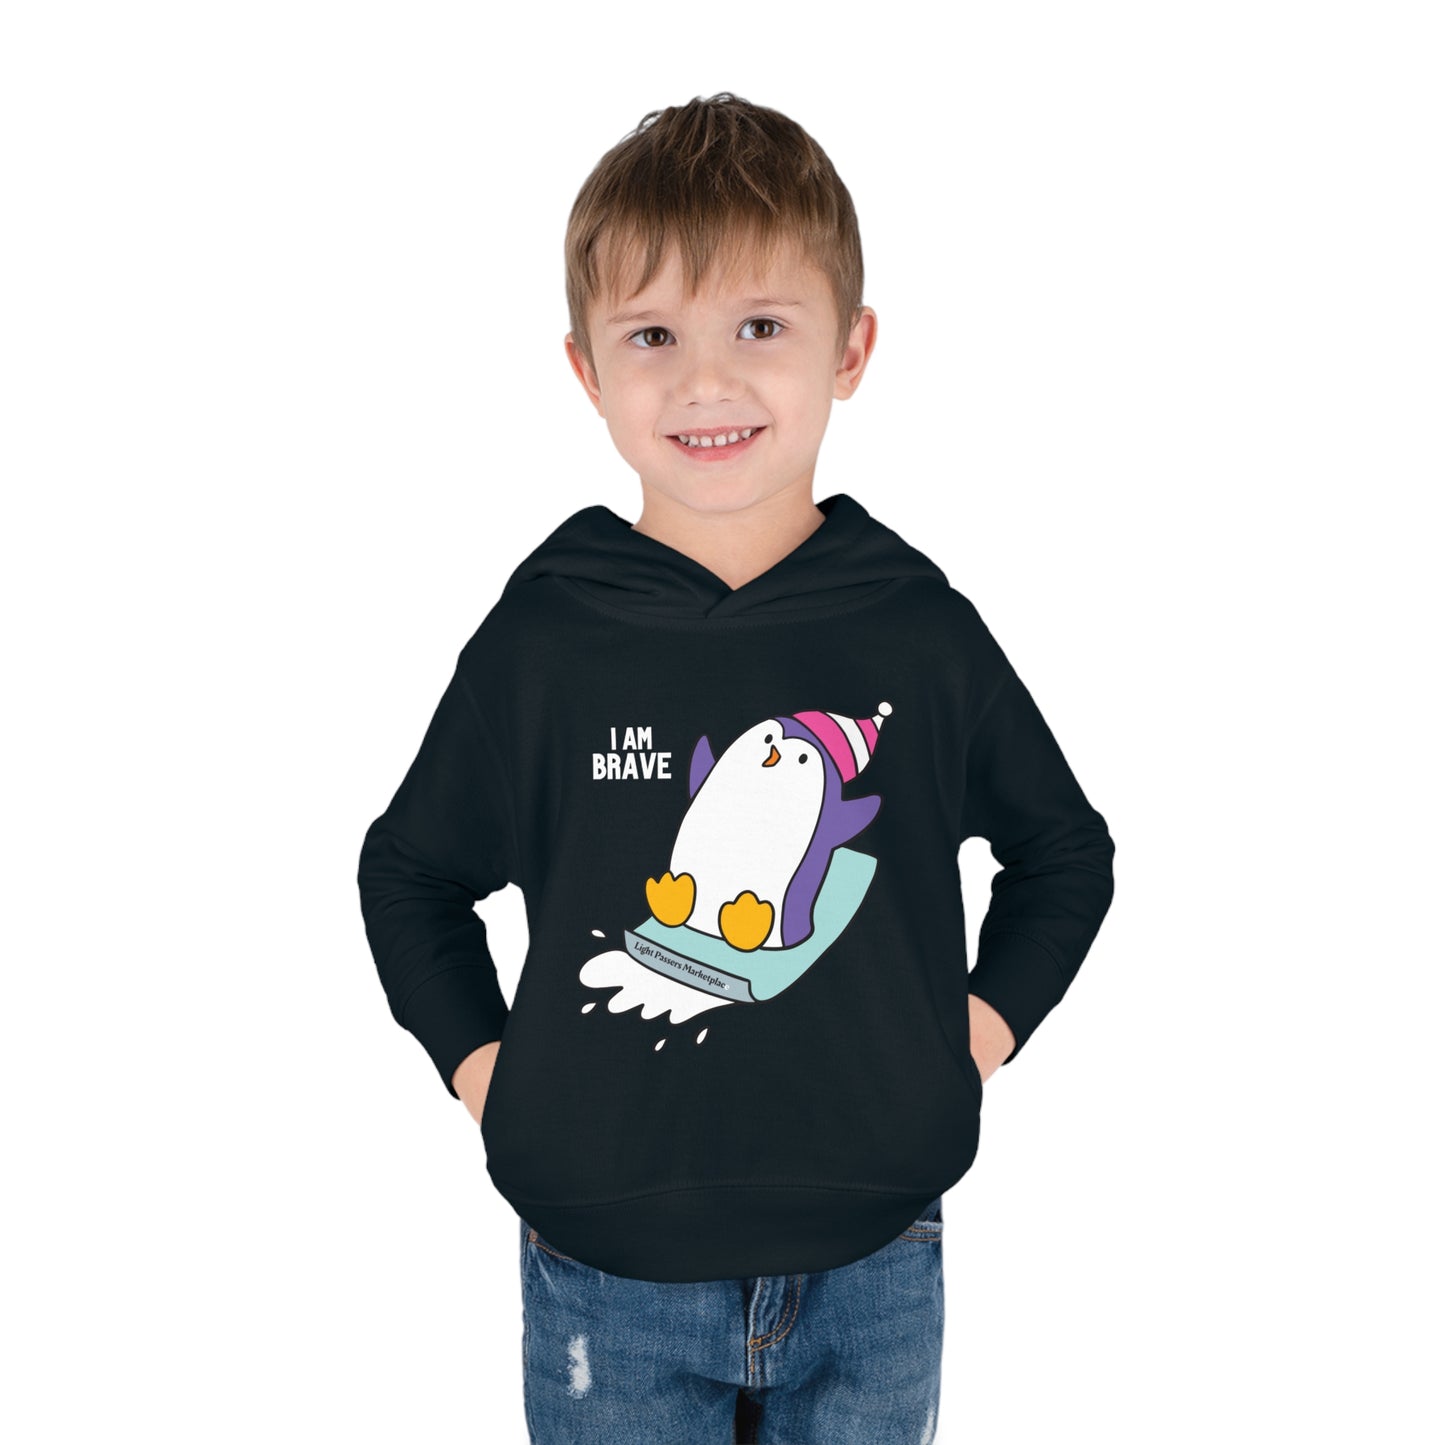 A smiling boy in a Brave Penguin Toddler Hooded Sweatshirt with penguin design, jersey-lined hood, and side seam pockets for cozy durability.